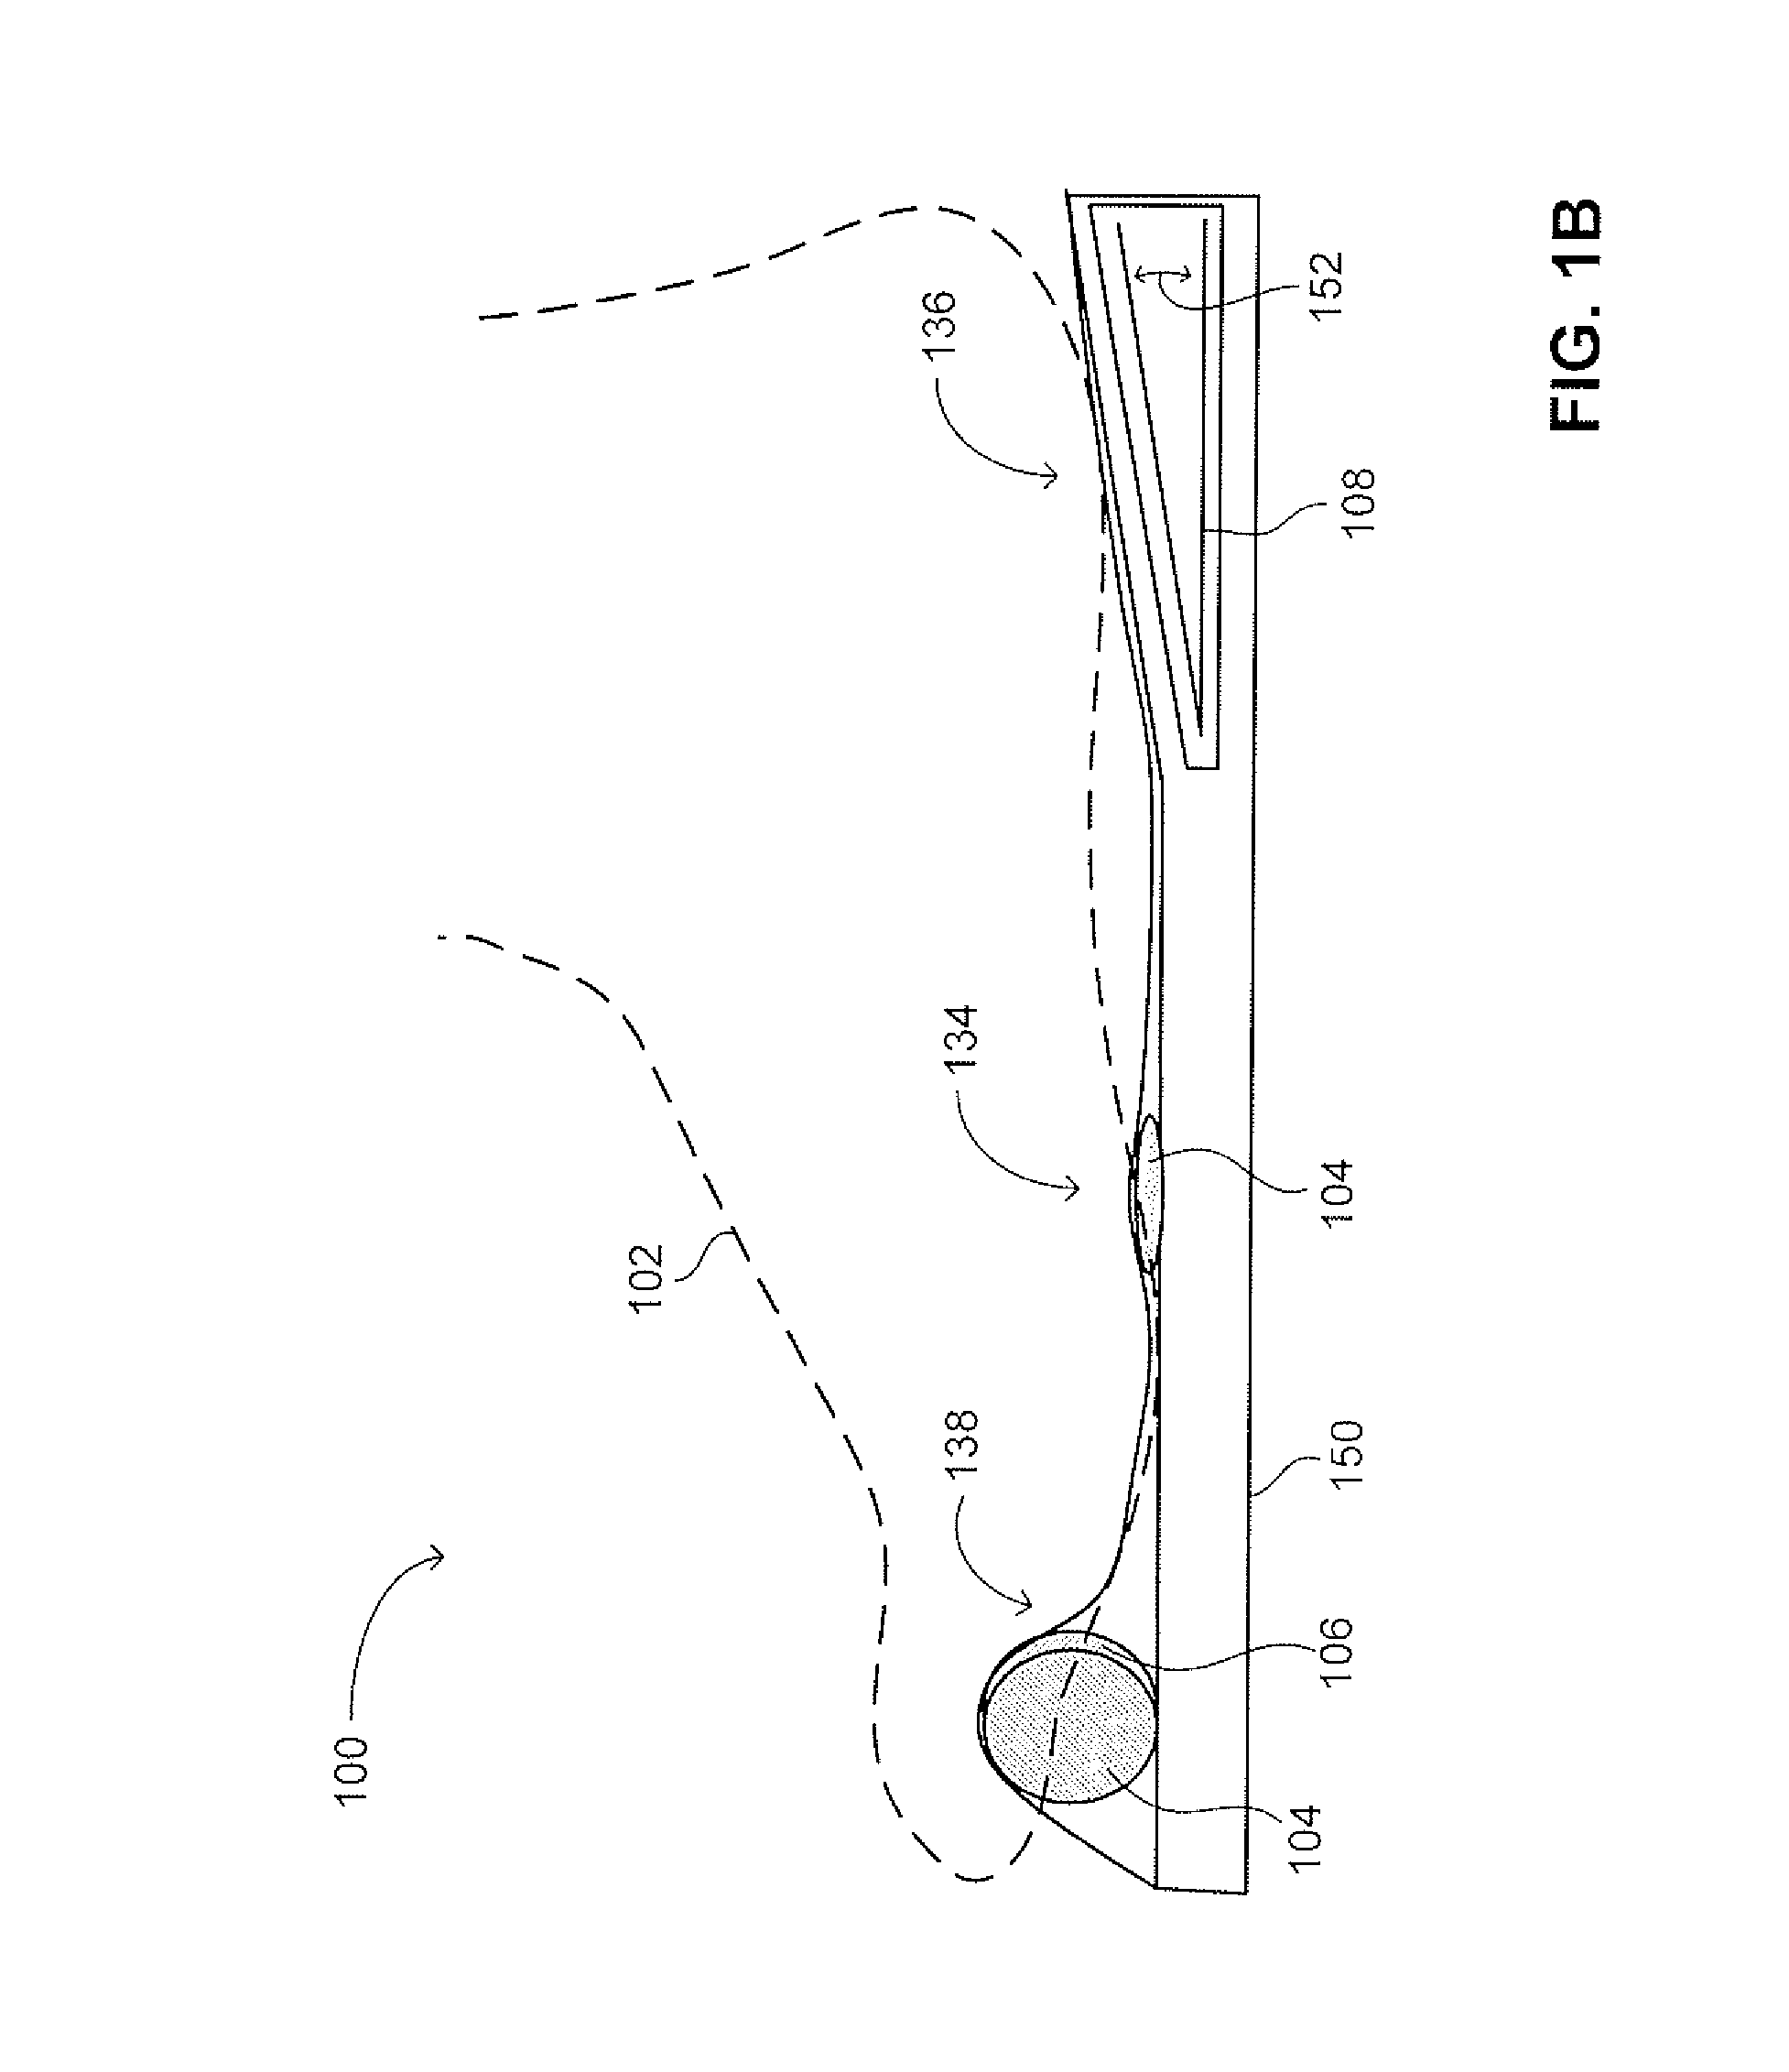 Pneumatic Alternating Pressure Relief of a Foot